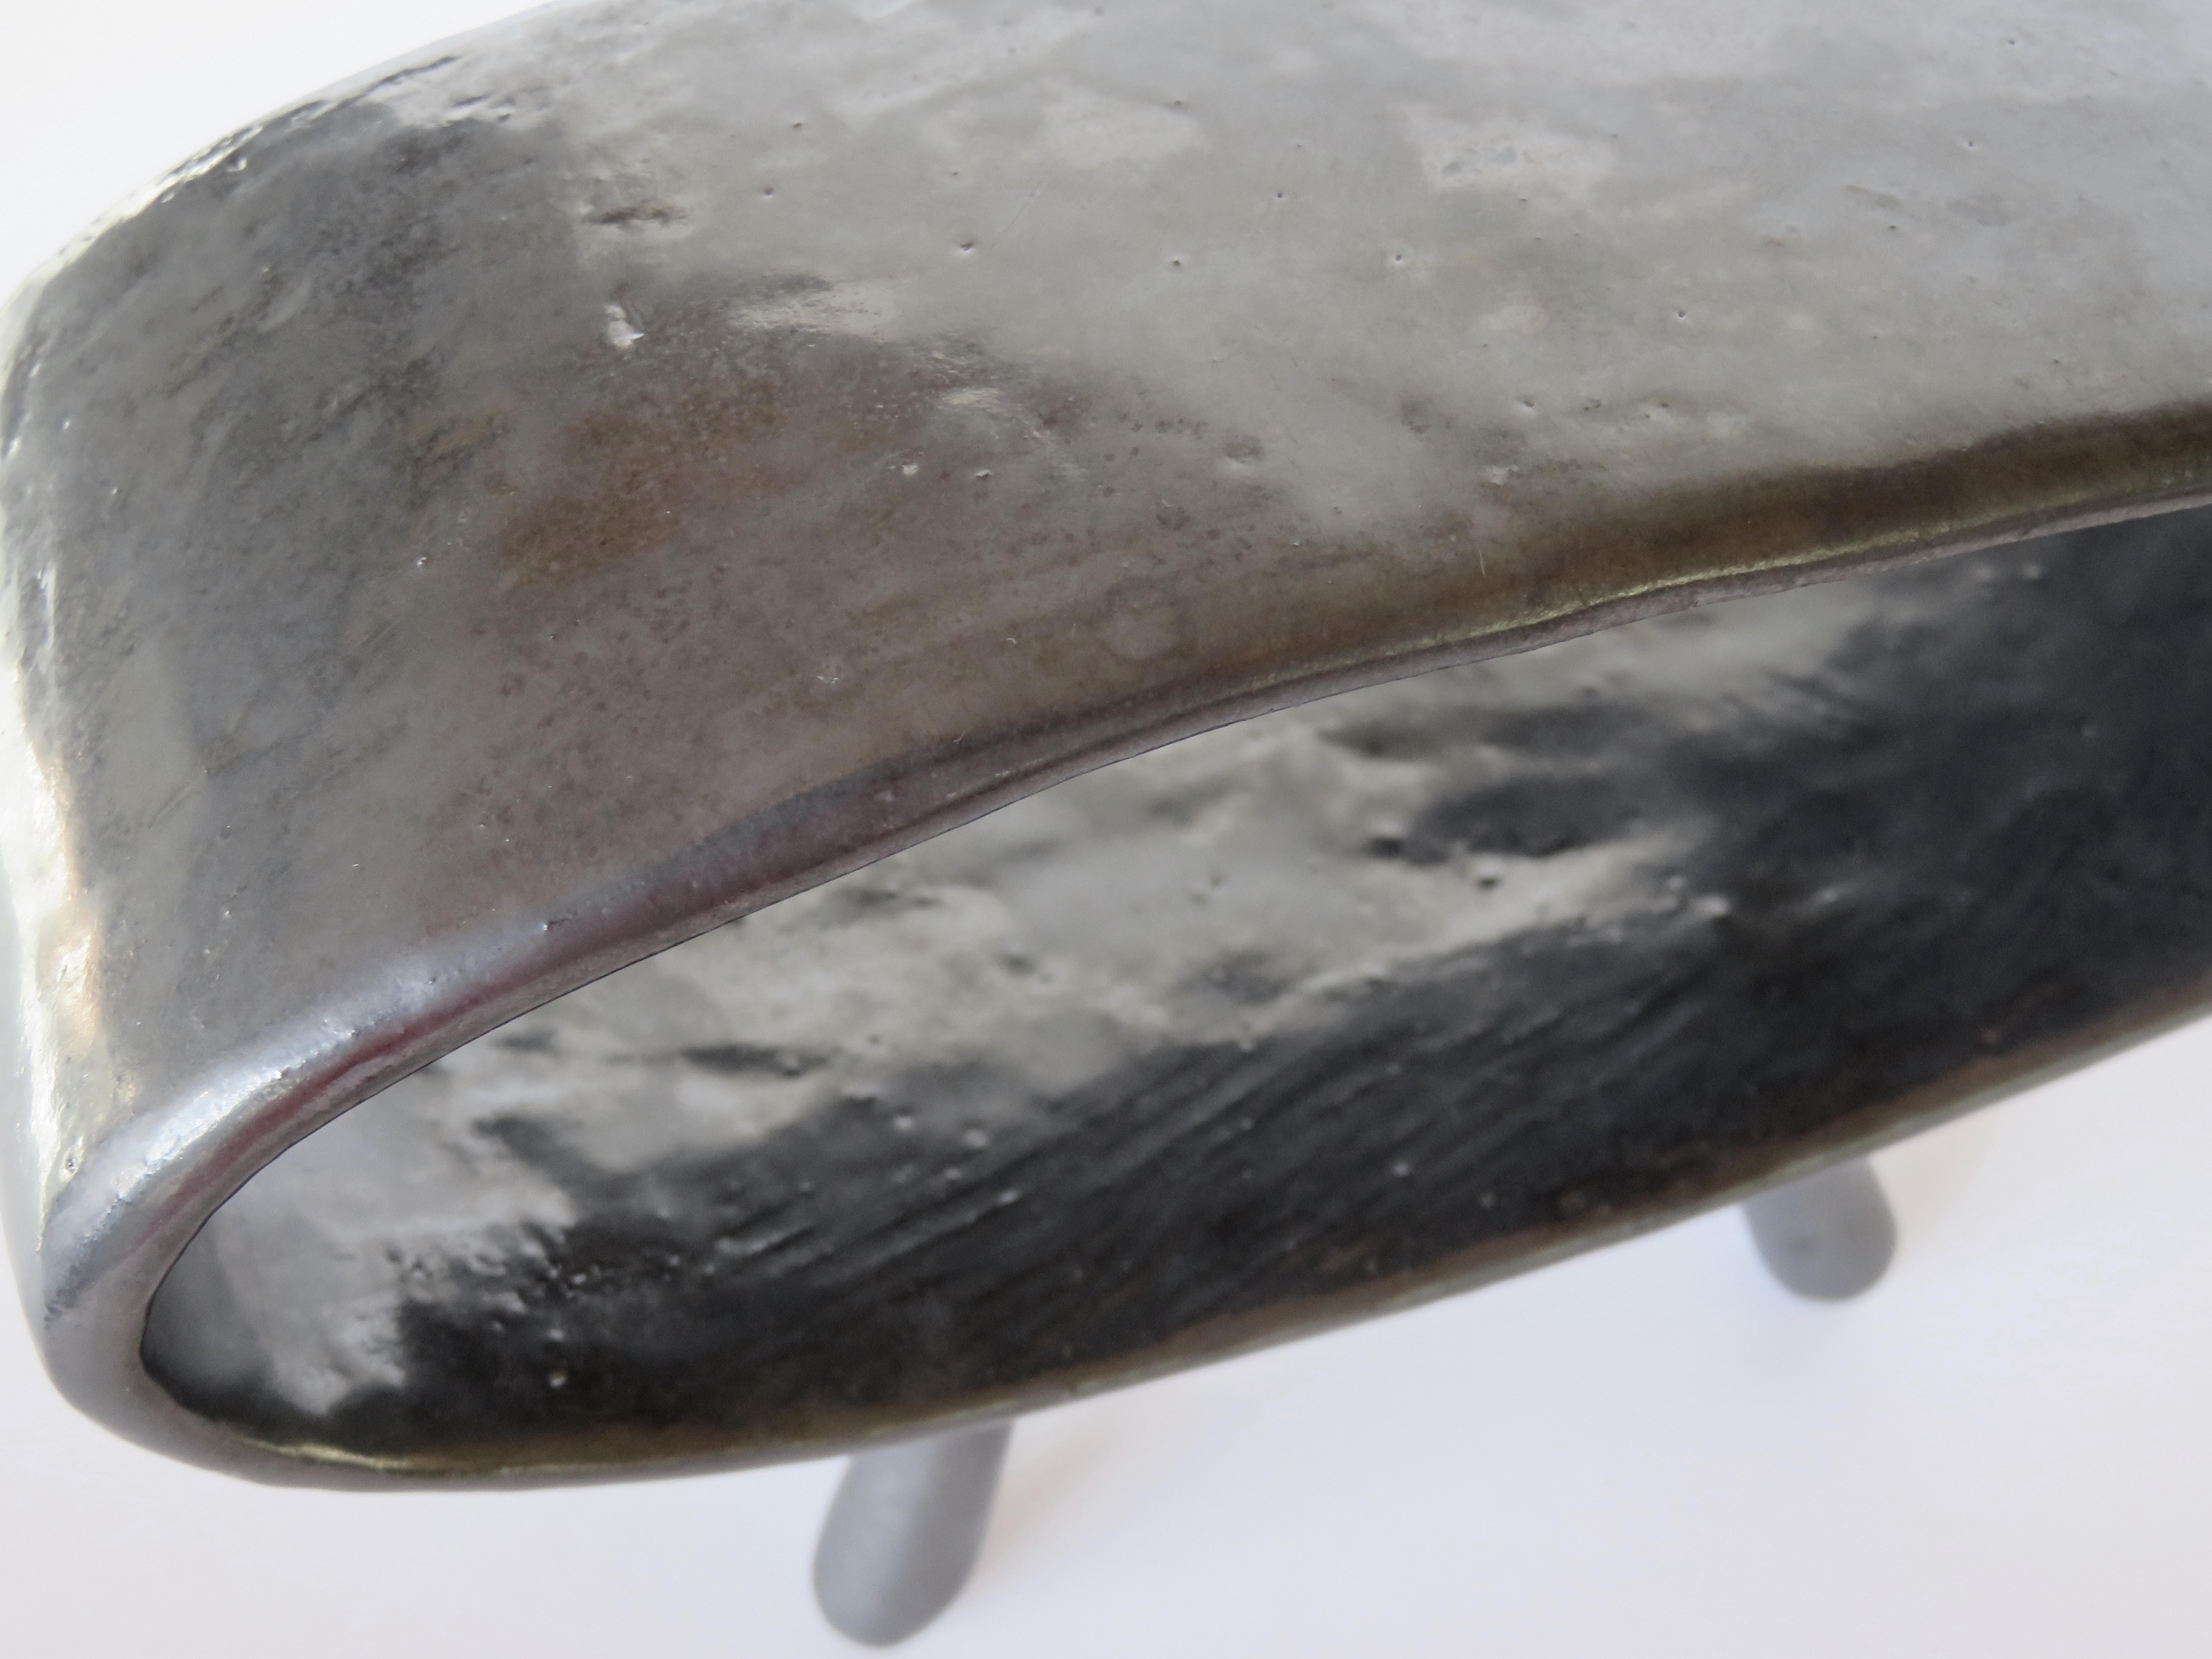 Metallic Black Ceramic Sculpture, Hollow Pointed Oval on 4 Legs, Hand Built 7